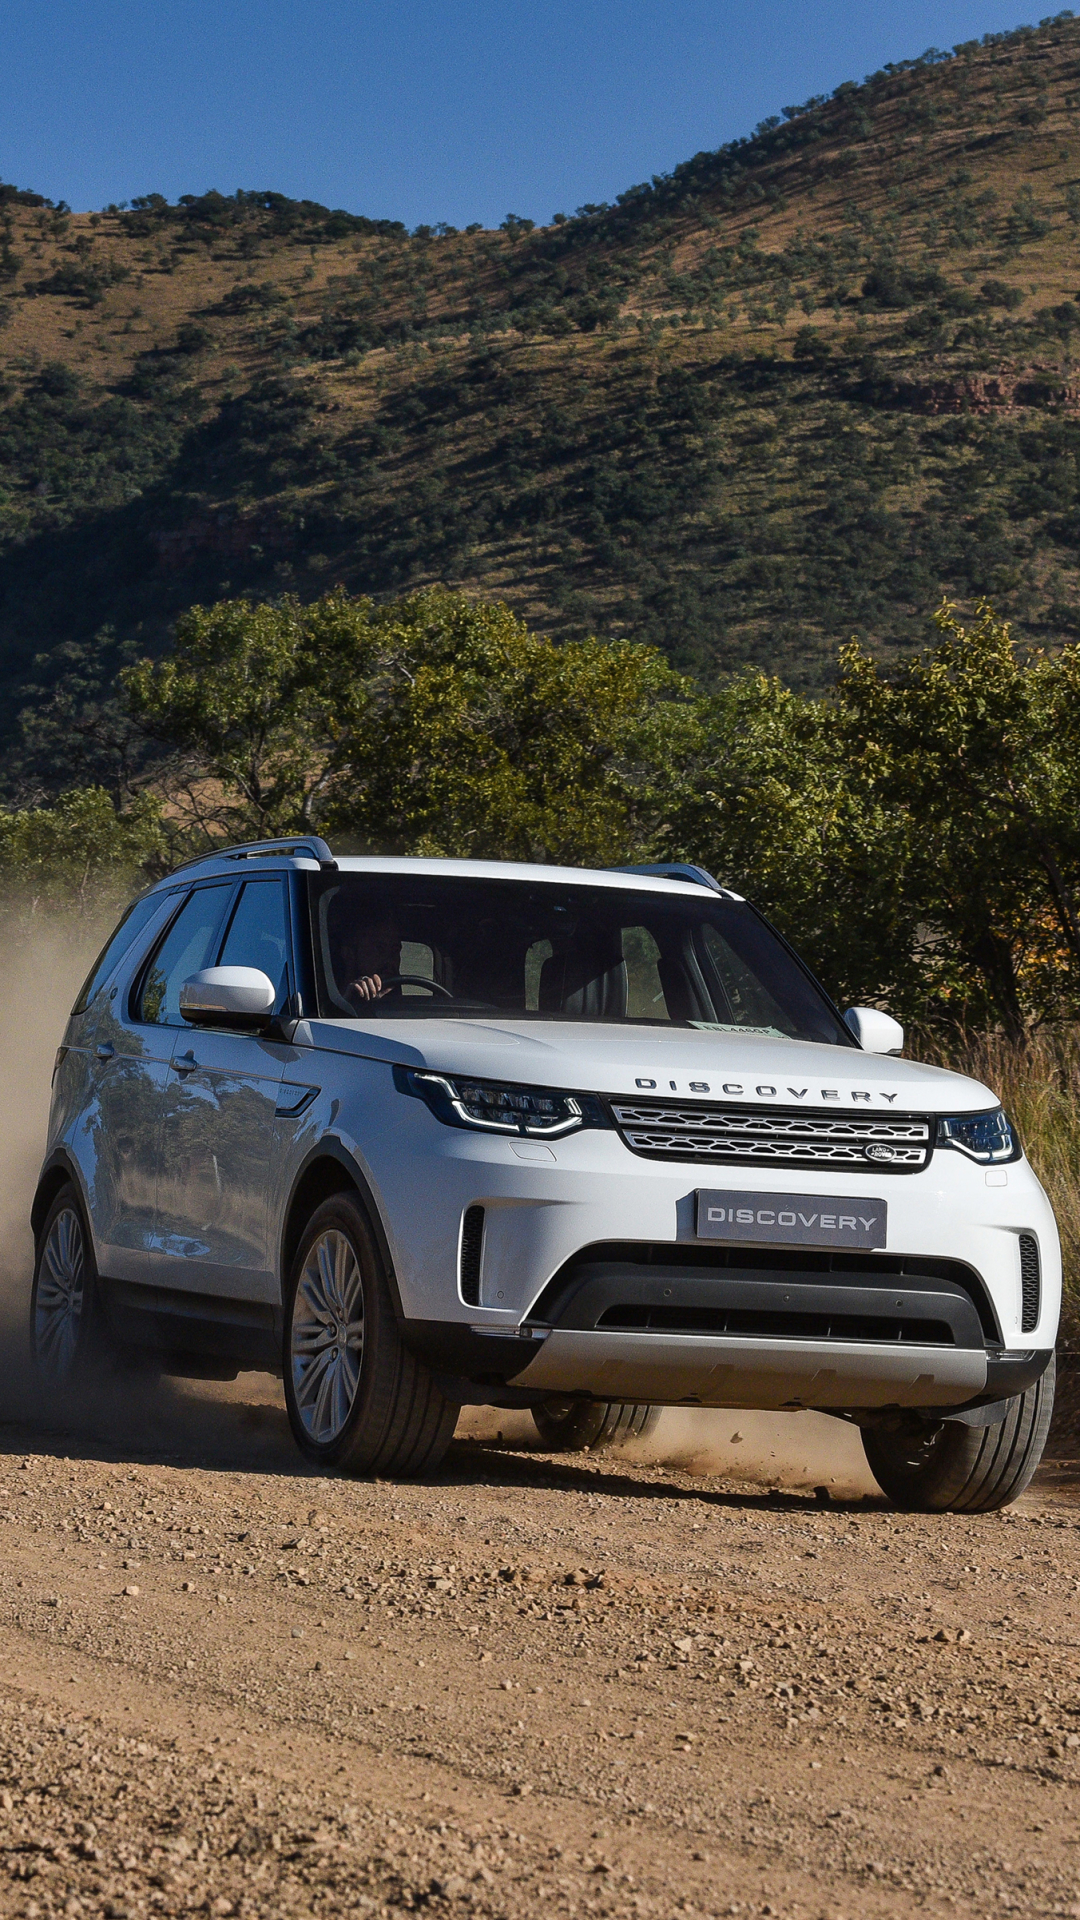 land rover discovery, vehicles, land rover, white car, vehicle, suv, car